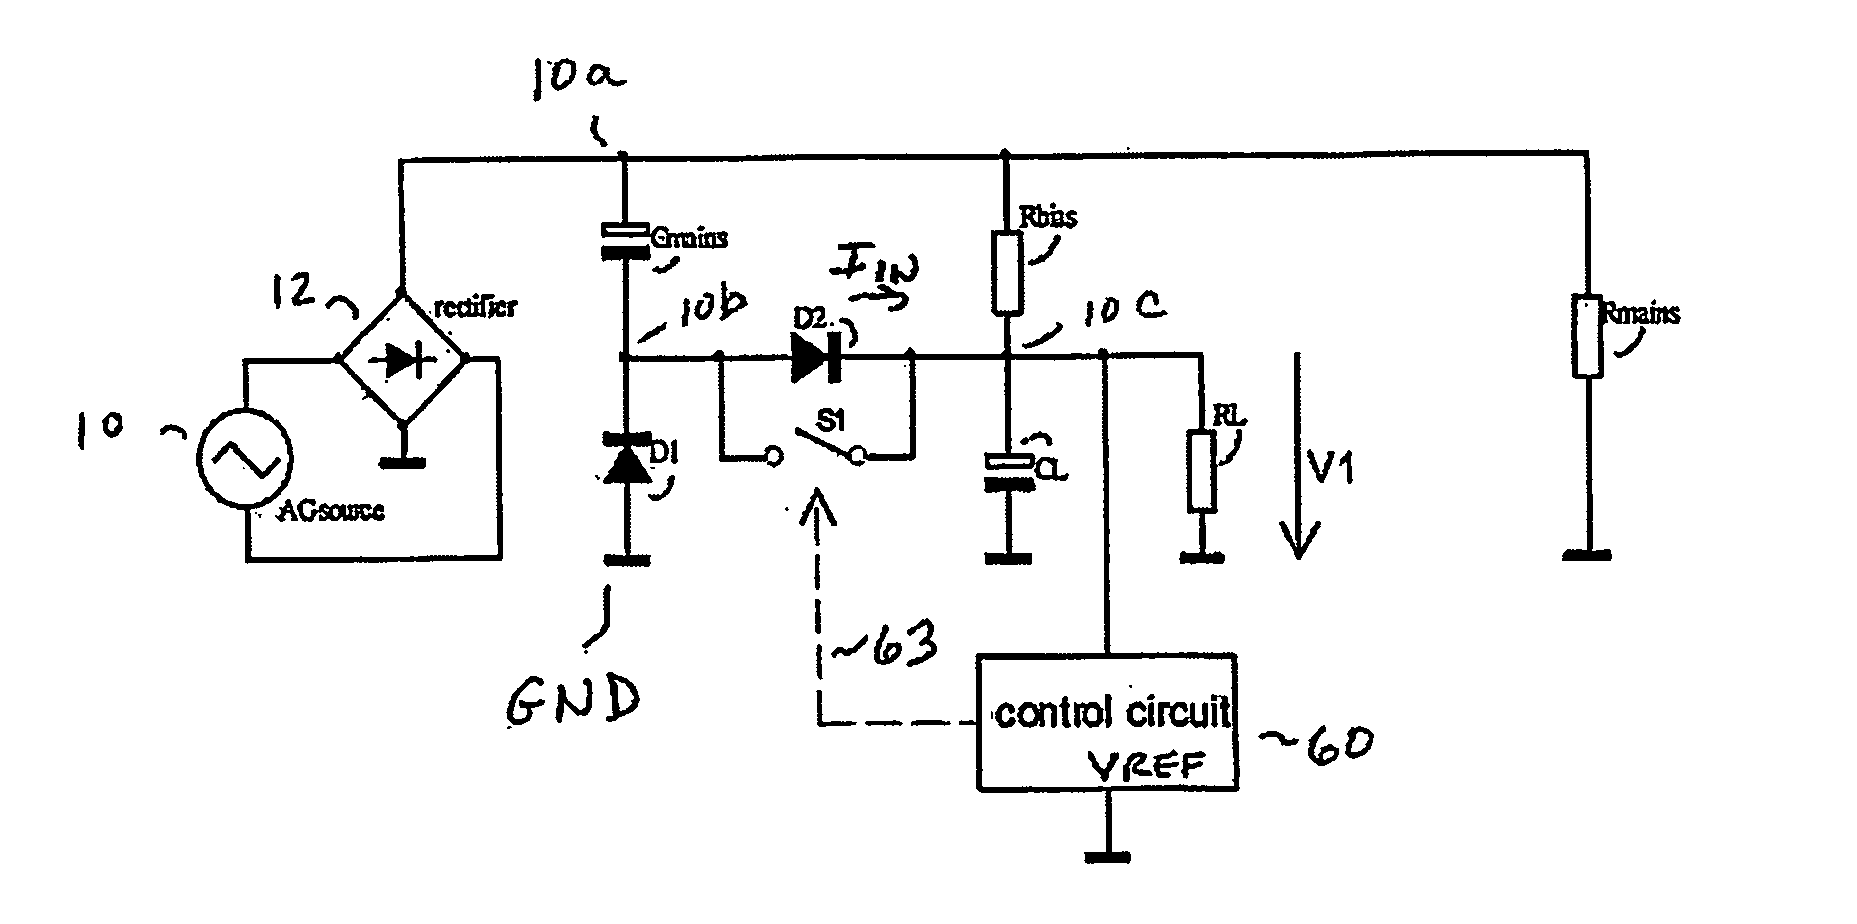 Capacitively coupled power supply